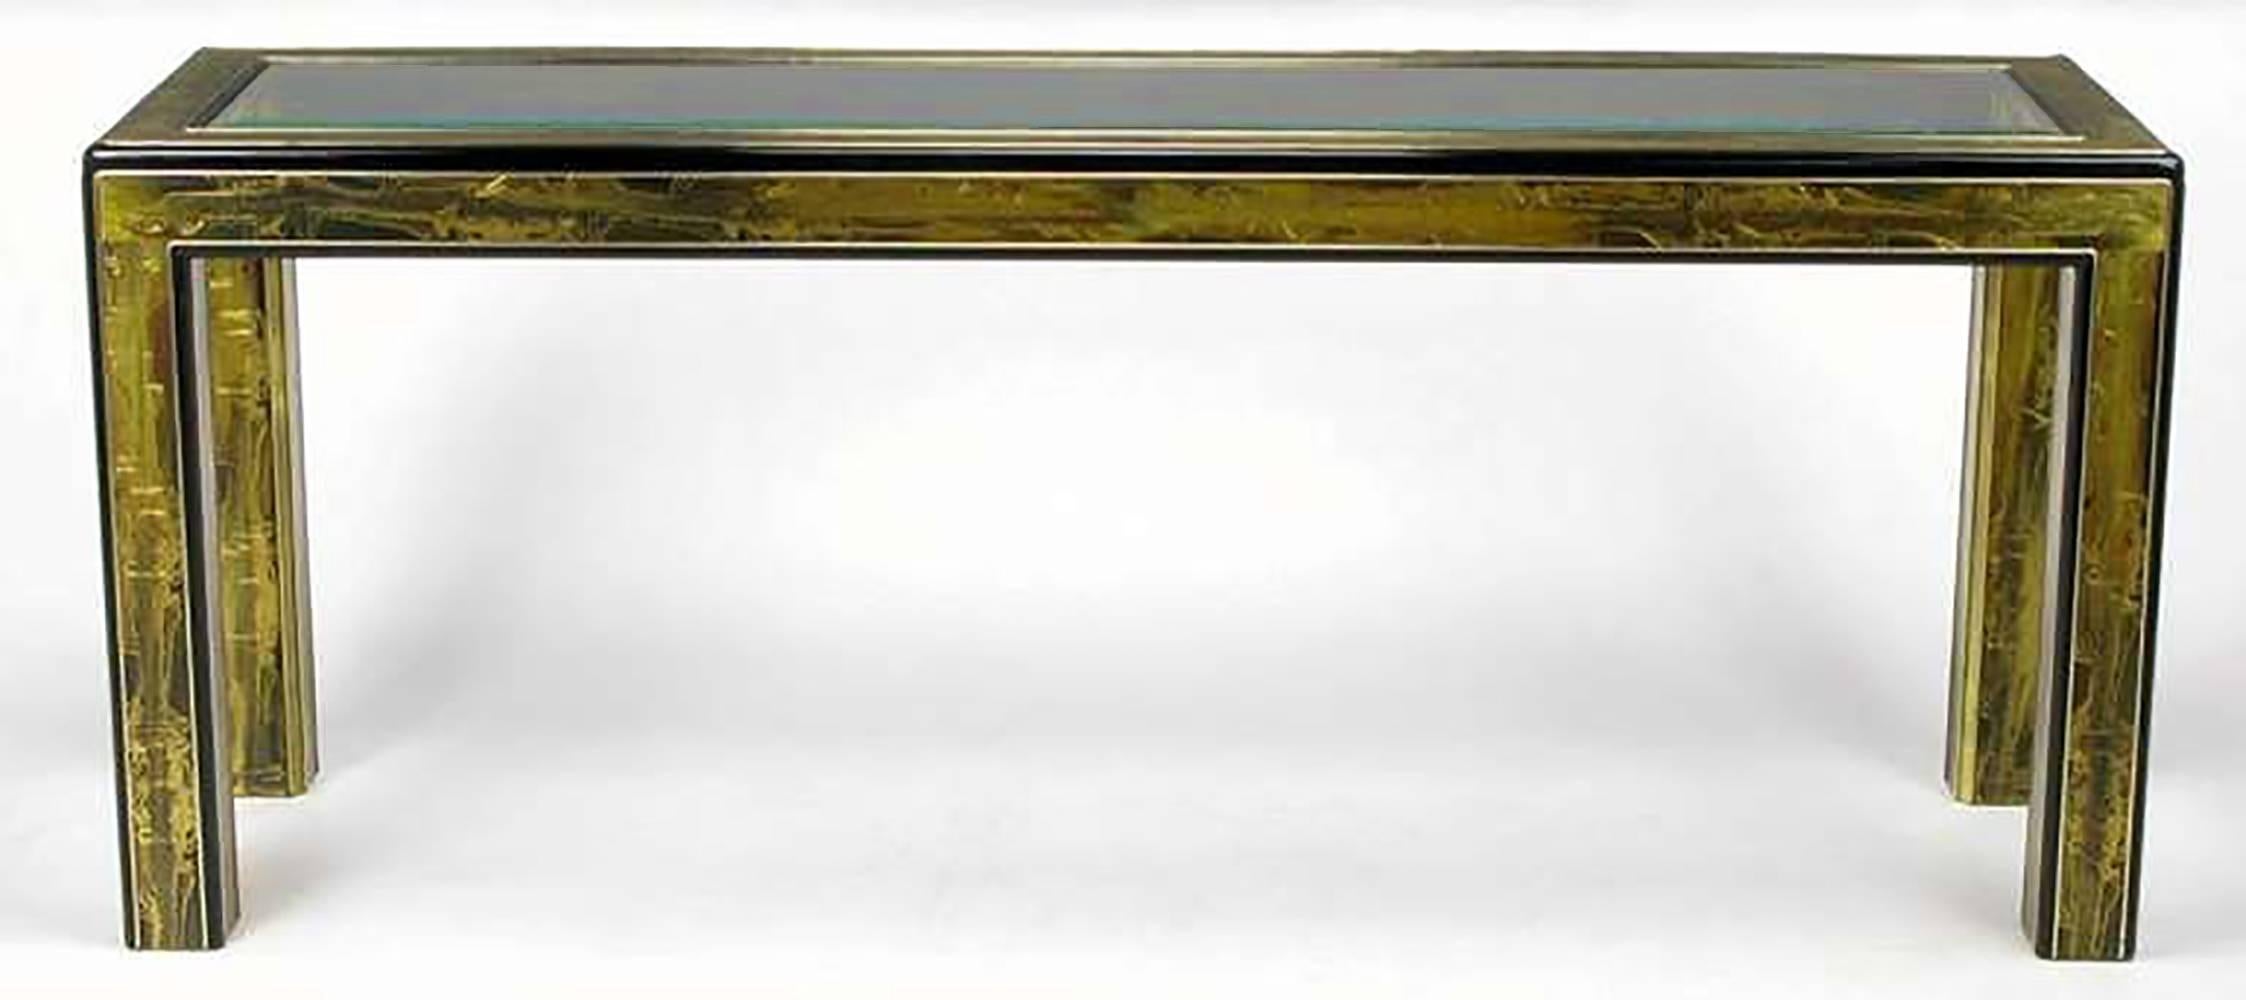 Acid etched panels by noted metal artist Bernhard Rohne cover nearly every flat surface of this black lacquered, radius edged Parsons console table from Mastercraft. Beveled center glass panel top.